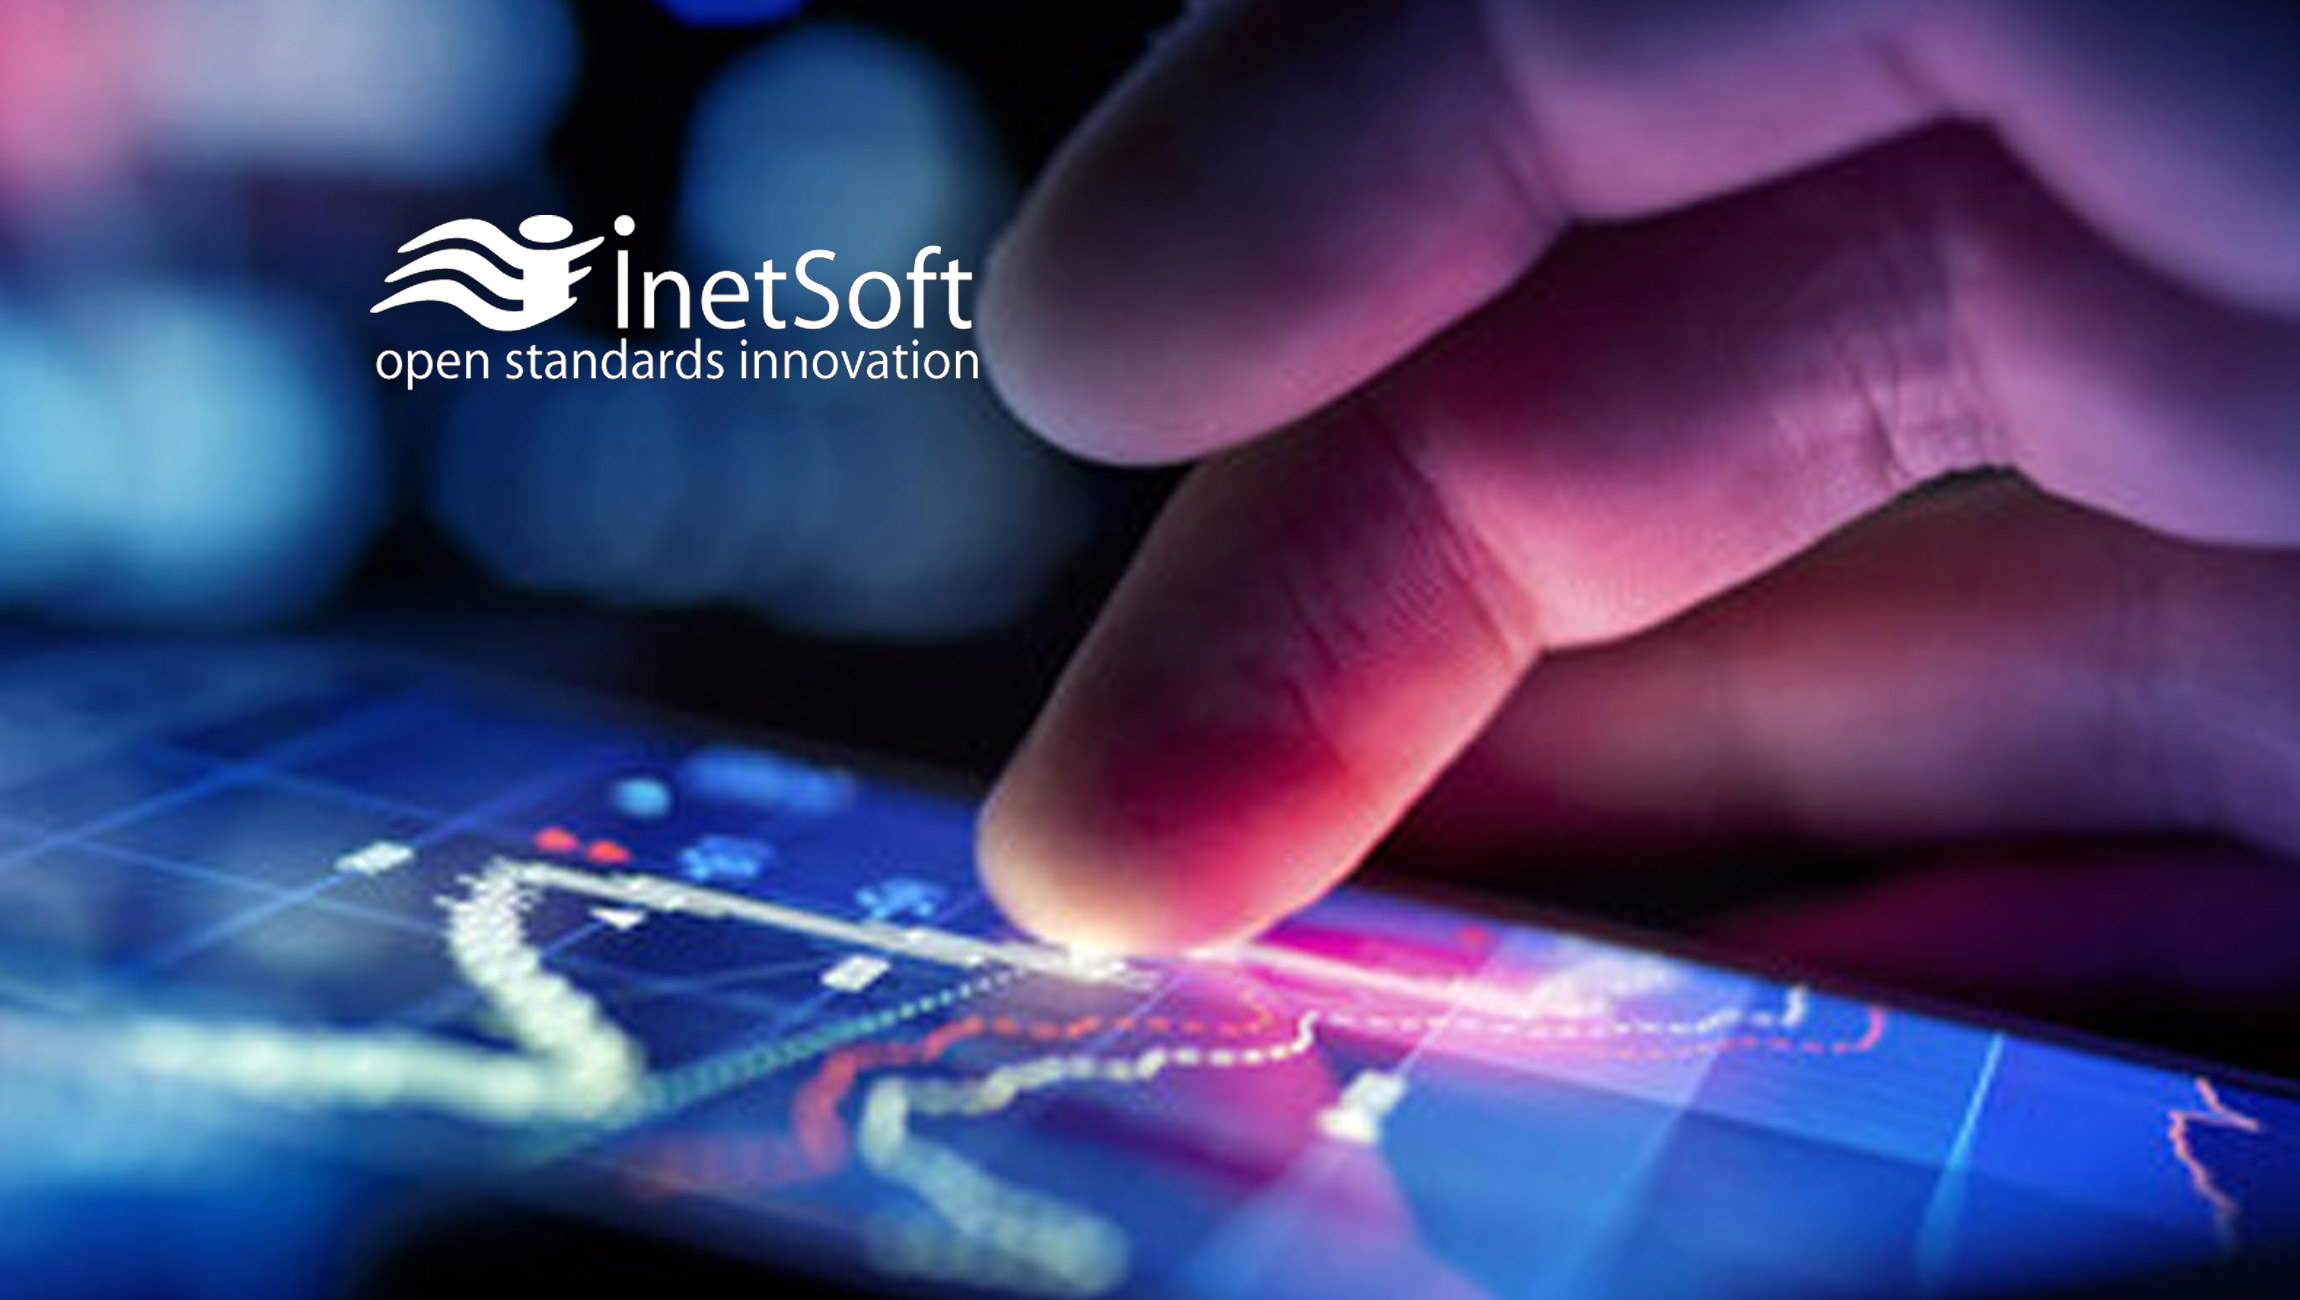 Inventory Management Provider Sperantus Selects InetSoft for Client Dashboards and Reports